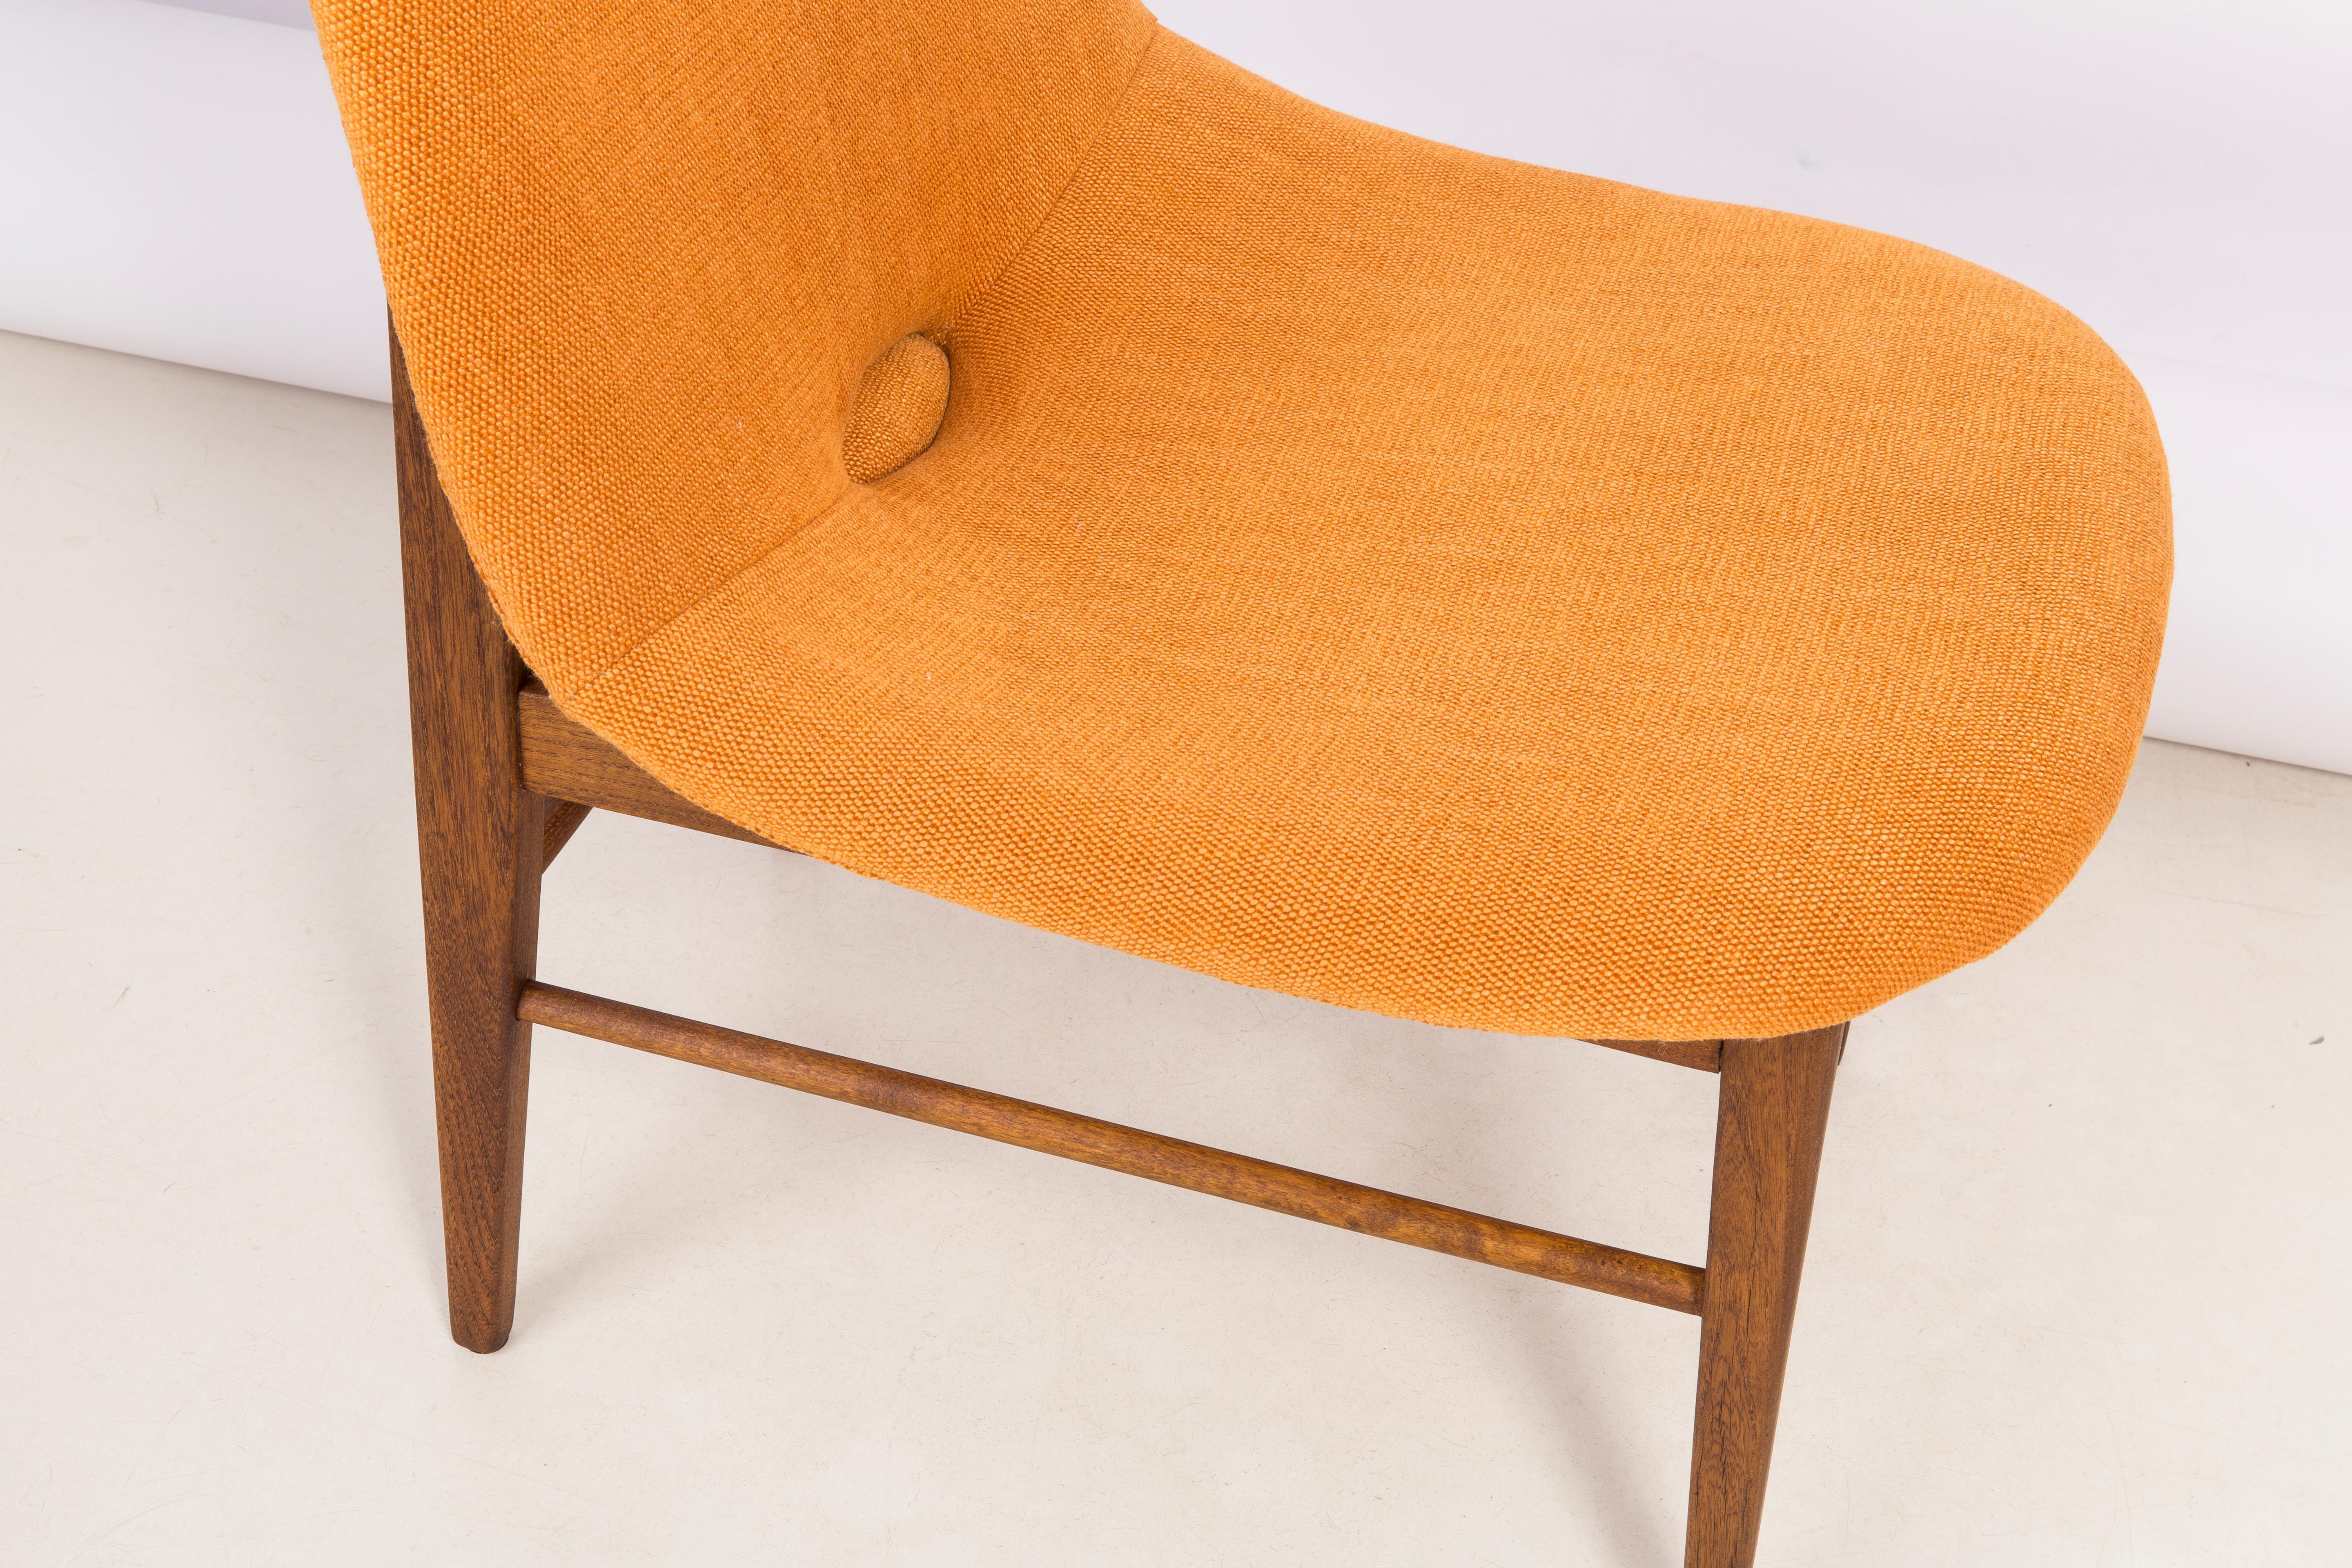 Hand-Crafted Set of Two Rare 20th Century Orange Shell Chairs, H. Lachert, 1960s For Sale